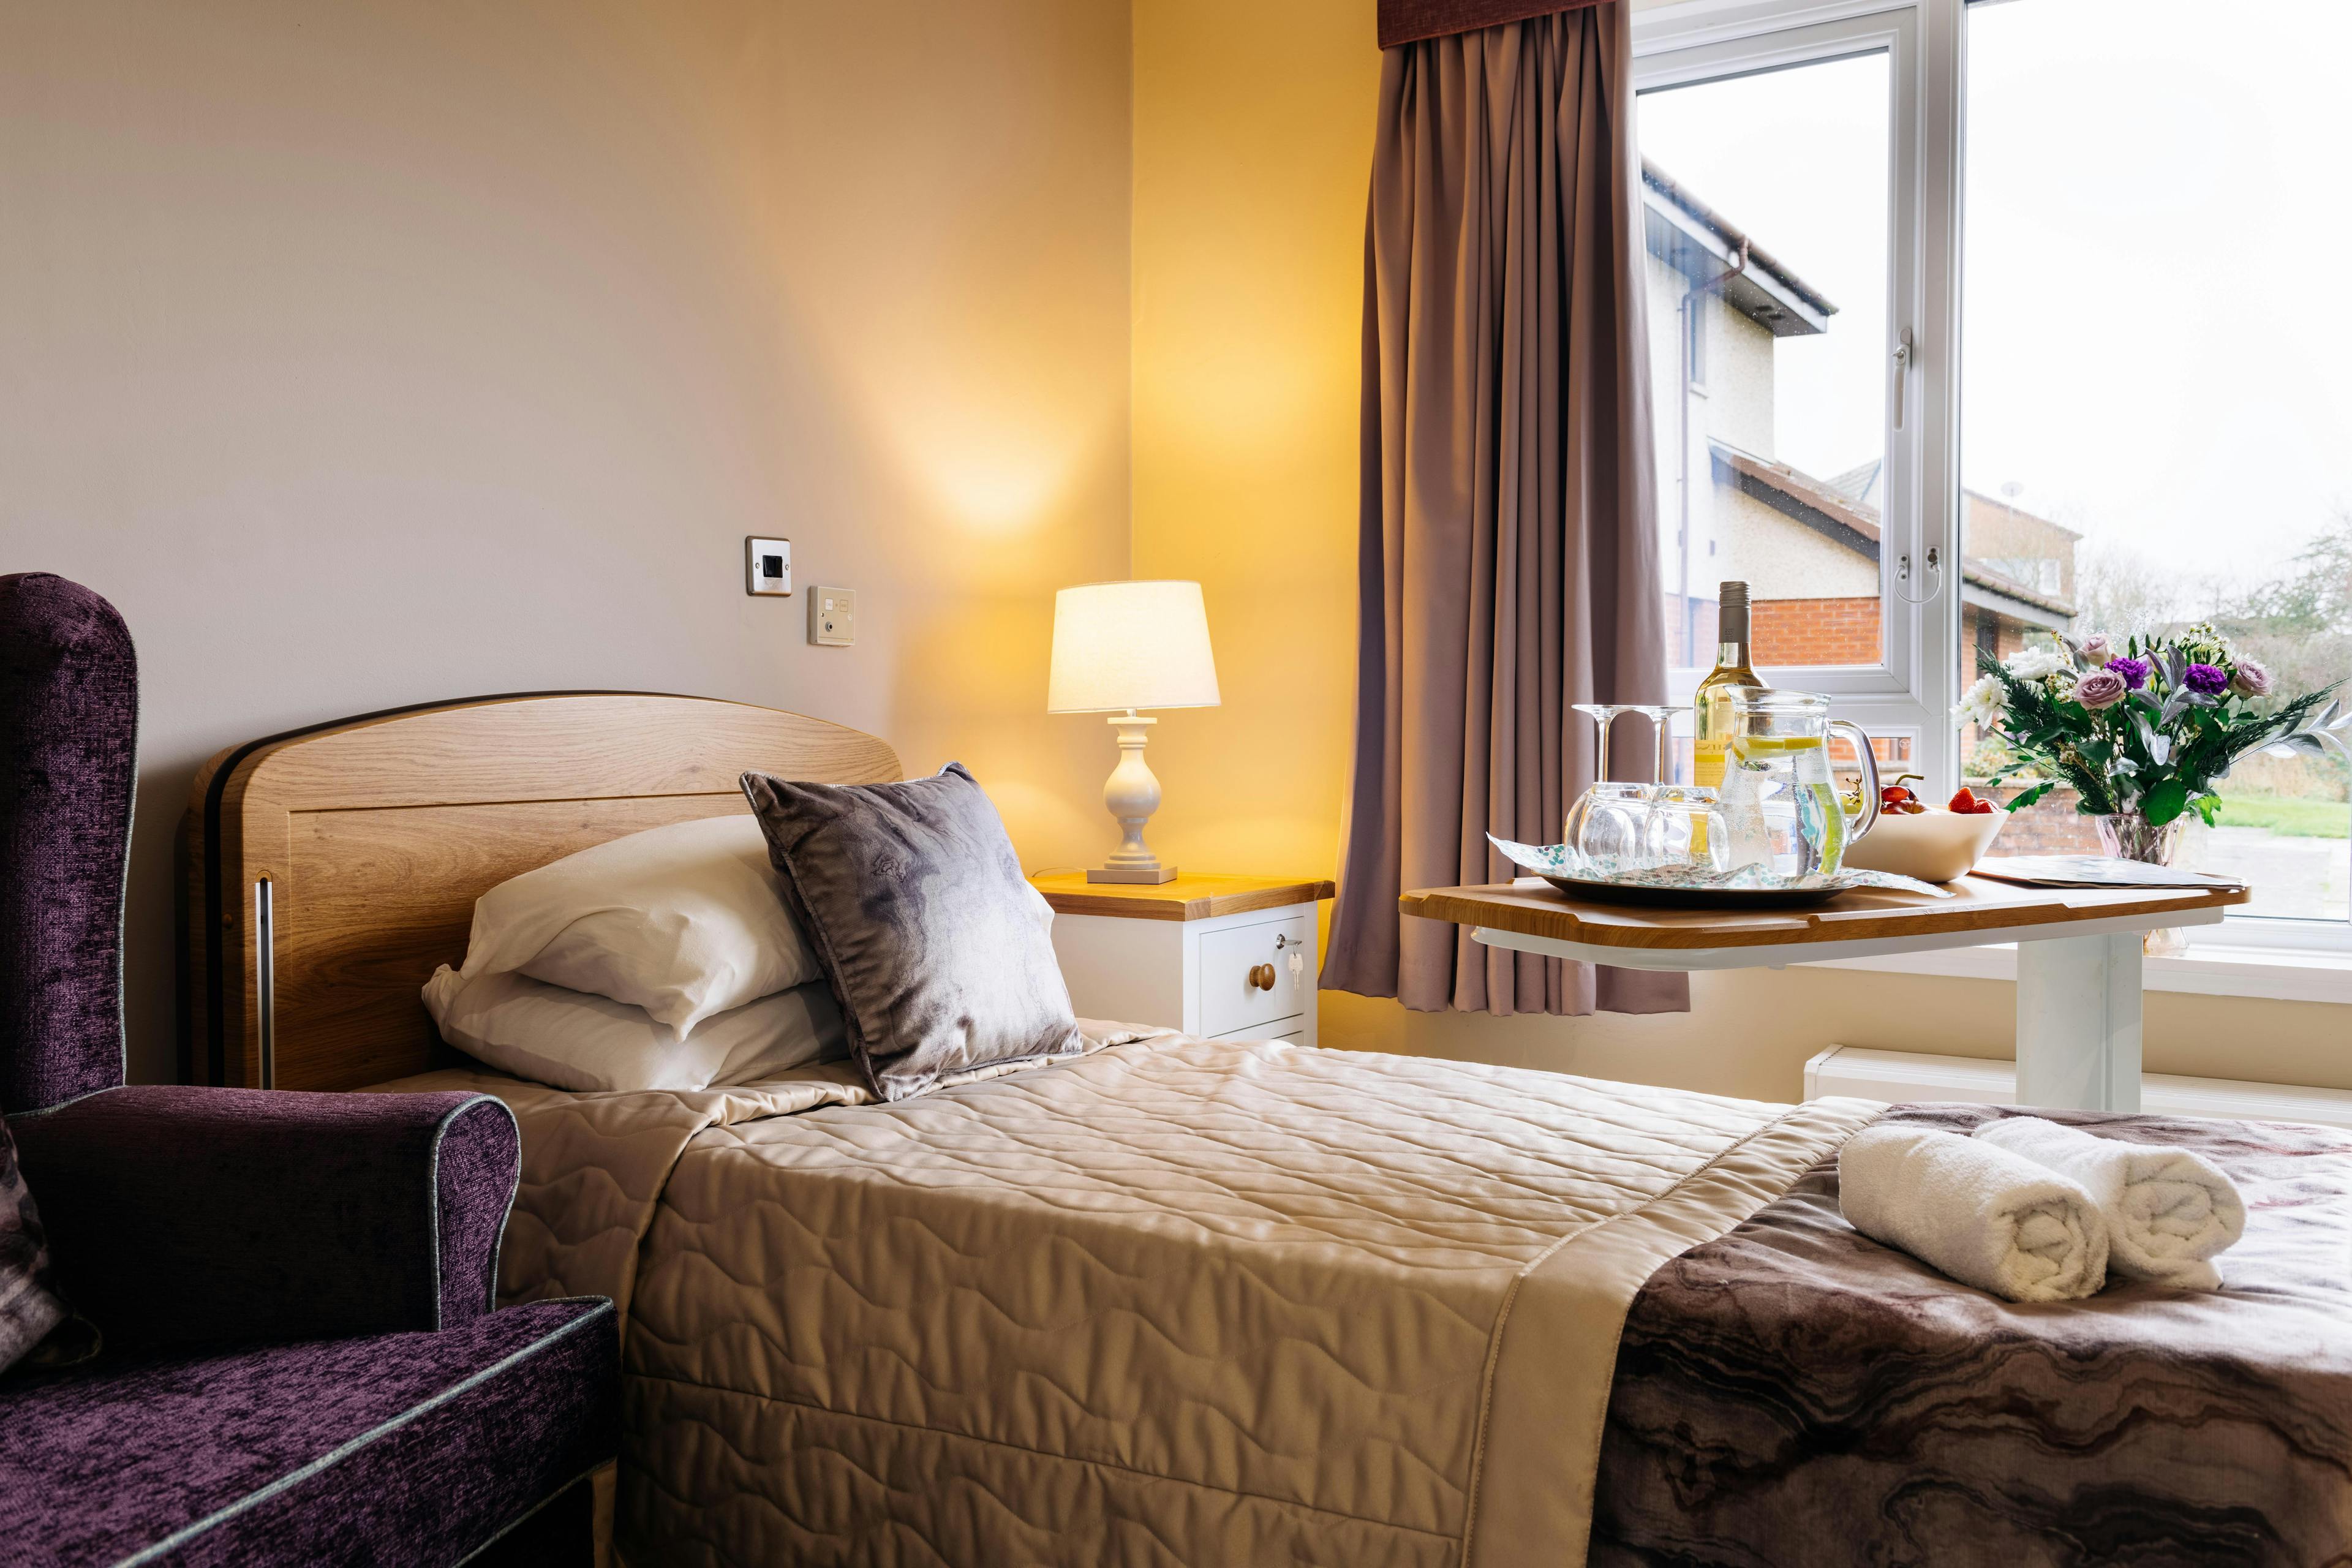 Bedroom at Lochduhar Care Home in Dumfries and Galloway, The Stewartry of Kirkcudbright